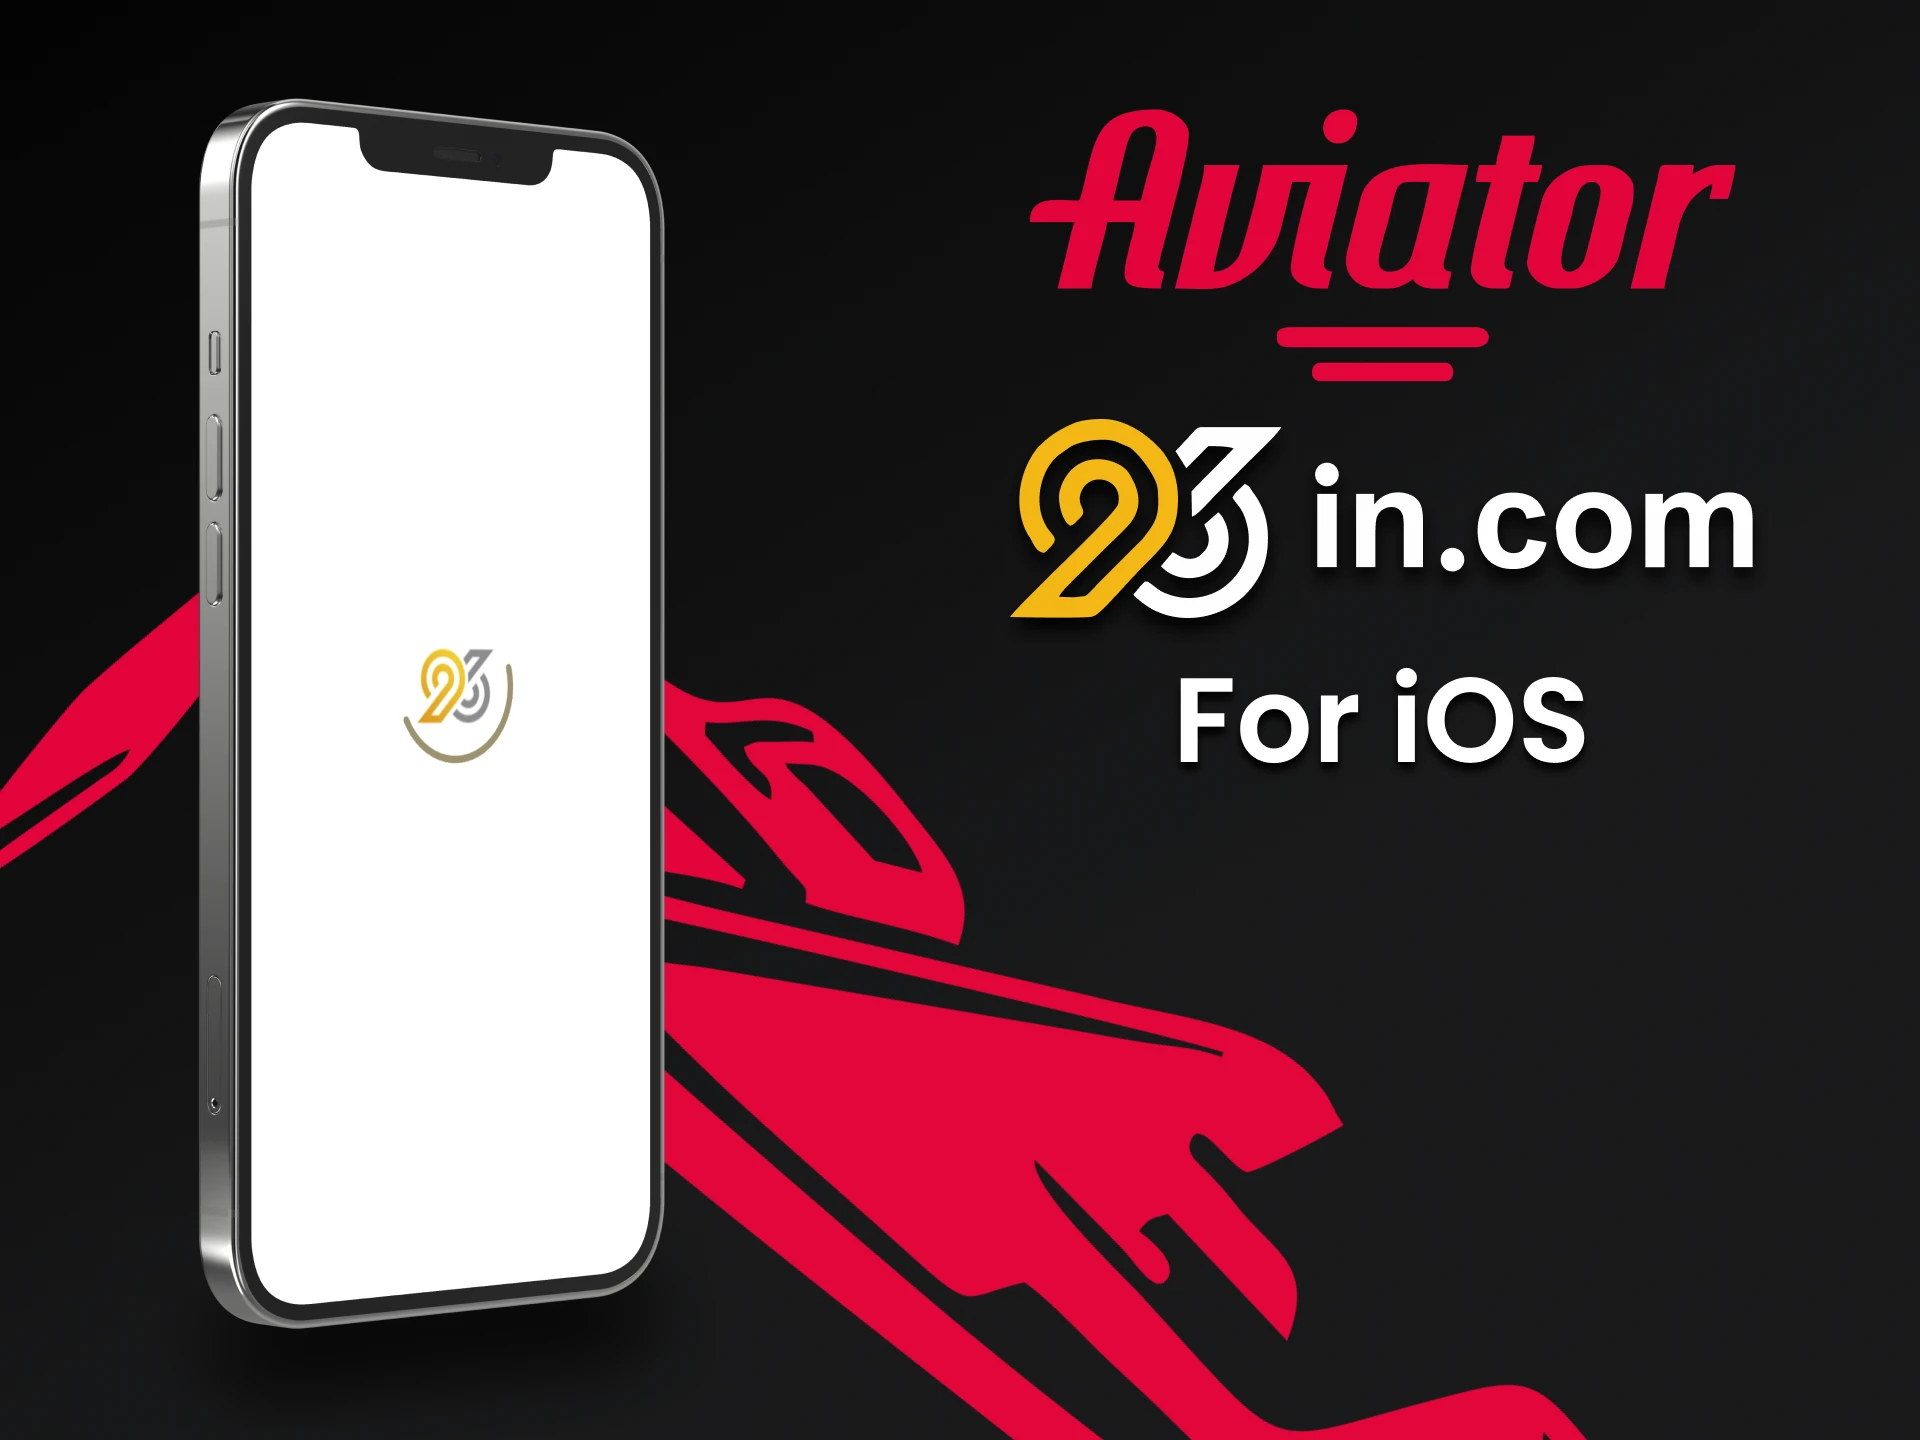 Download the 96in app to play Aviator on iOS.